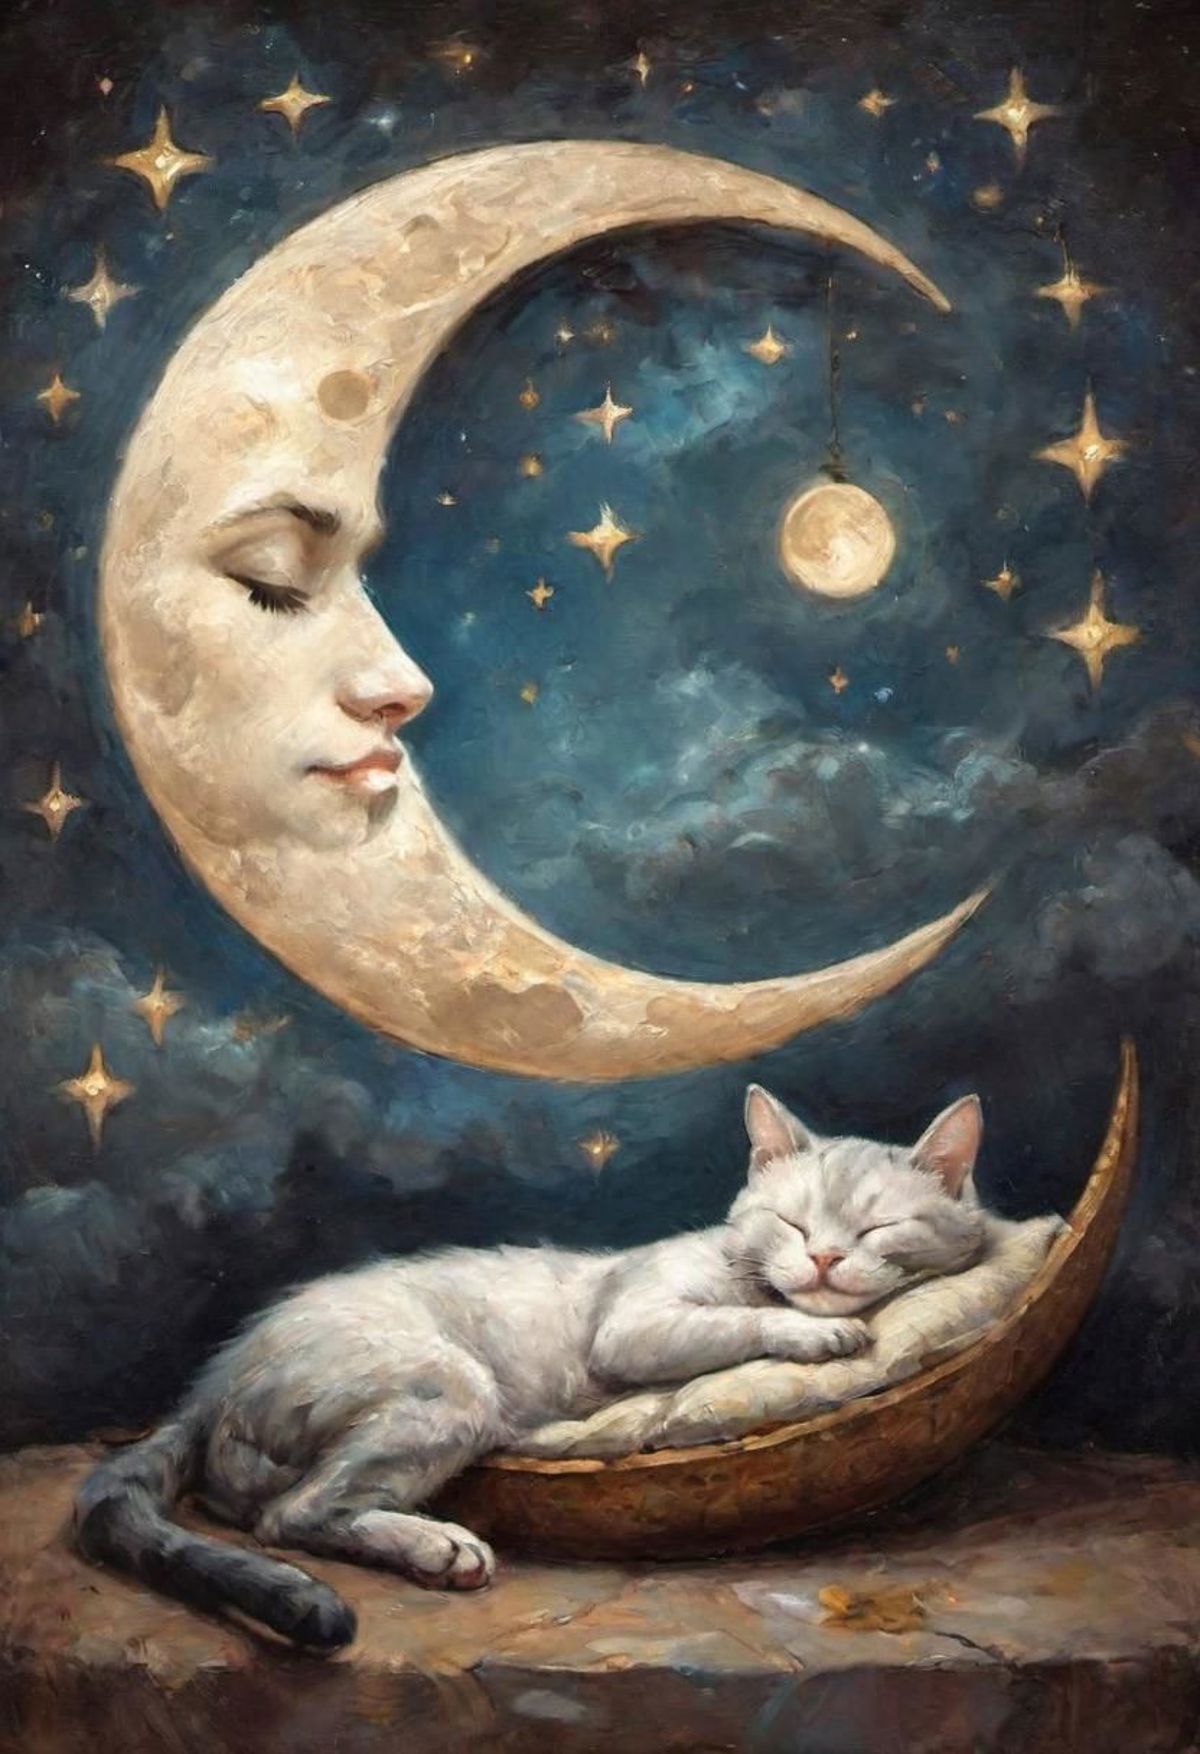 A painting of a white cat sleeping under a moon.